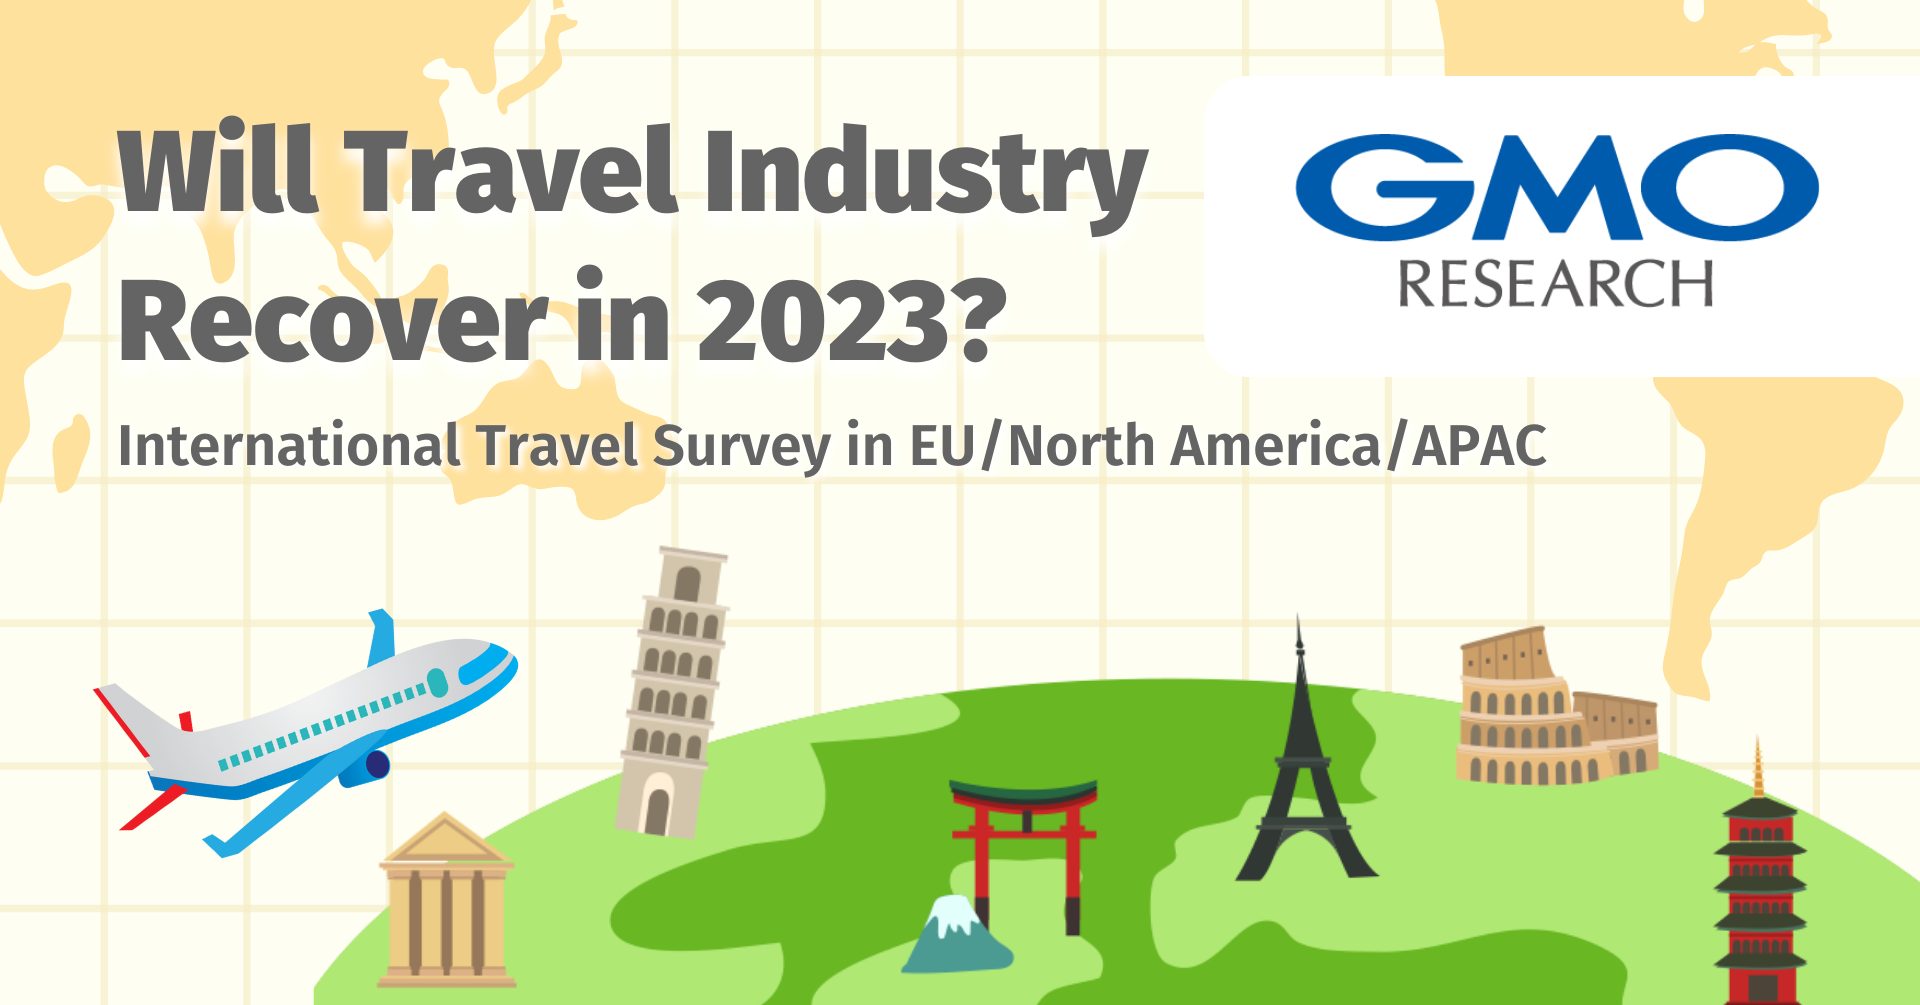 Will travel industry recover in 2023?